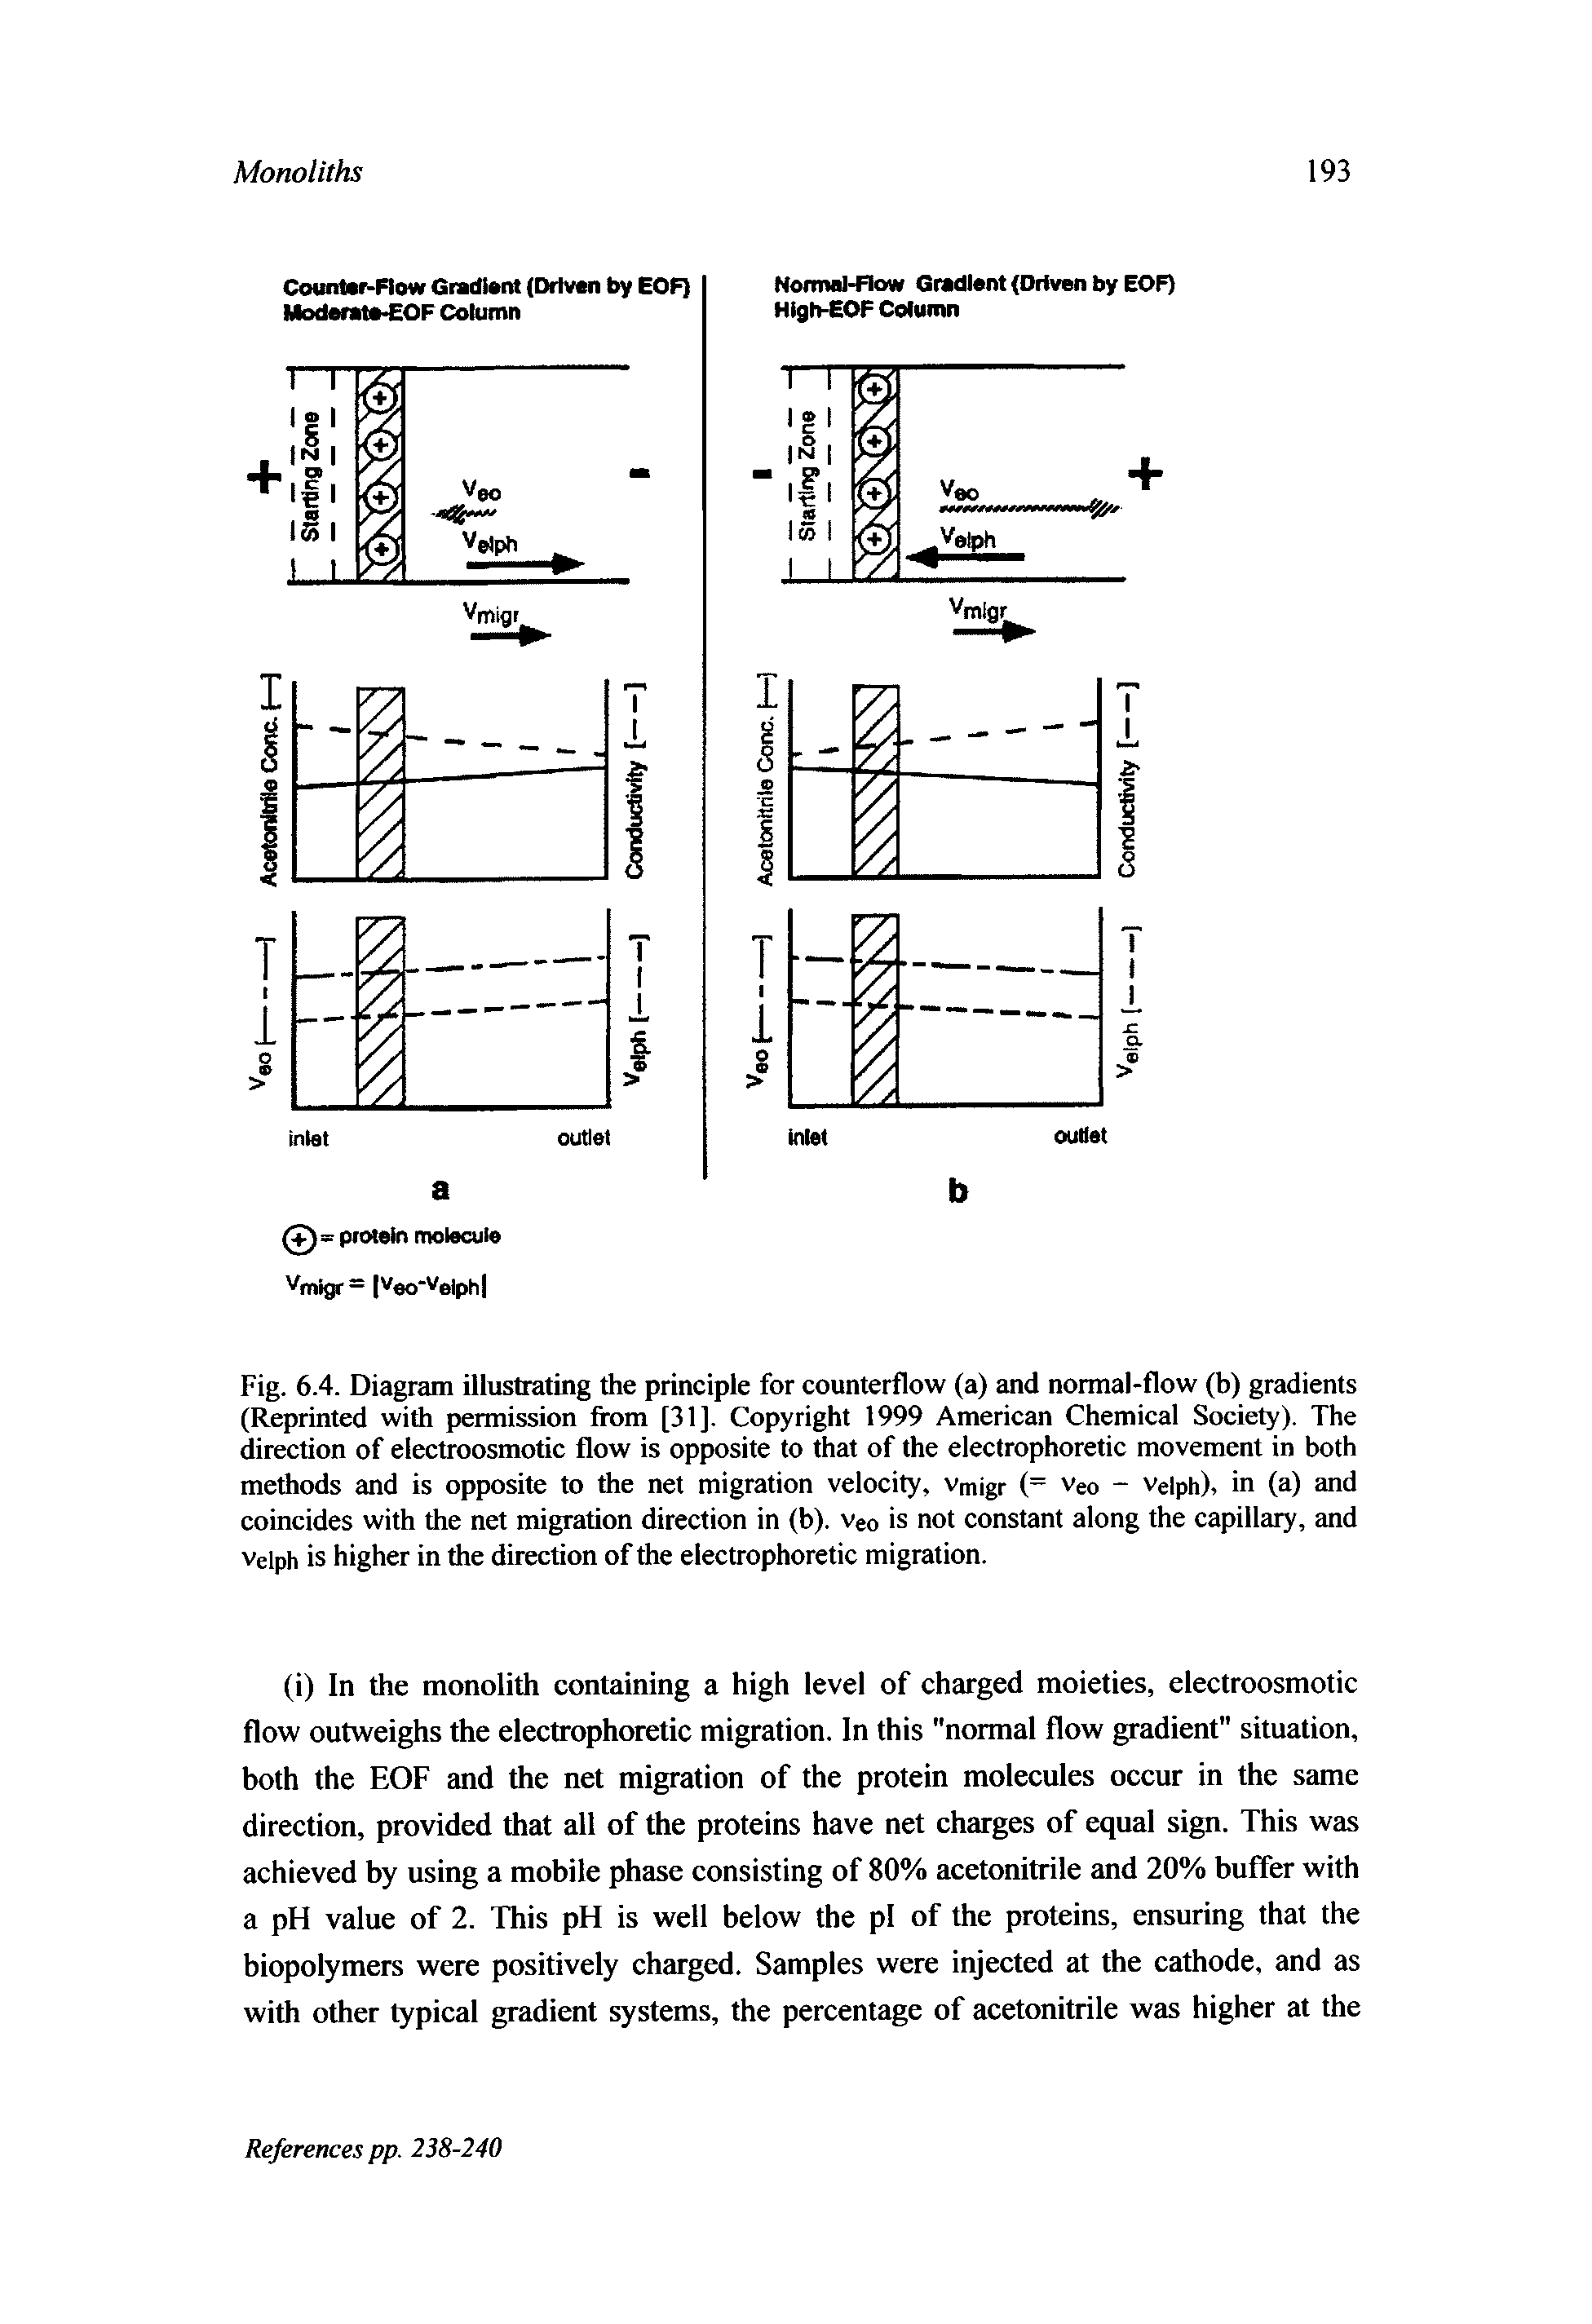 Fig. 6.4. Diagram illustrating the principle for counterflow (a) and normal-flow (b) gradients (Reprinted with permission from [31]. Copyright 1999 American Chemical Society). The direction of electroosmotic flow is opposite to that of the electrophoretic movement in both methods and is opposite to the net migration velocity, vmigr (= ve0 - ve ph), in (a) and coincides with the net migration direction in (b). veo is not constant along the capillary, and velph is higher in the direction of the electrophoretic migration.